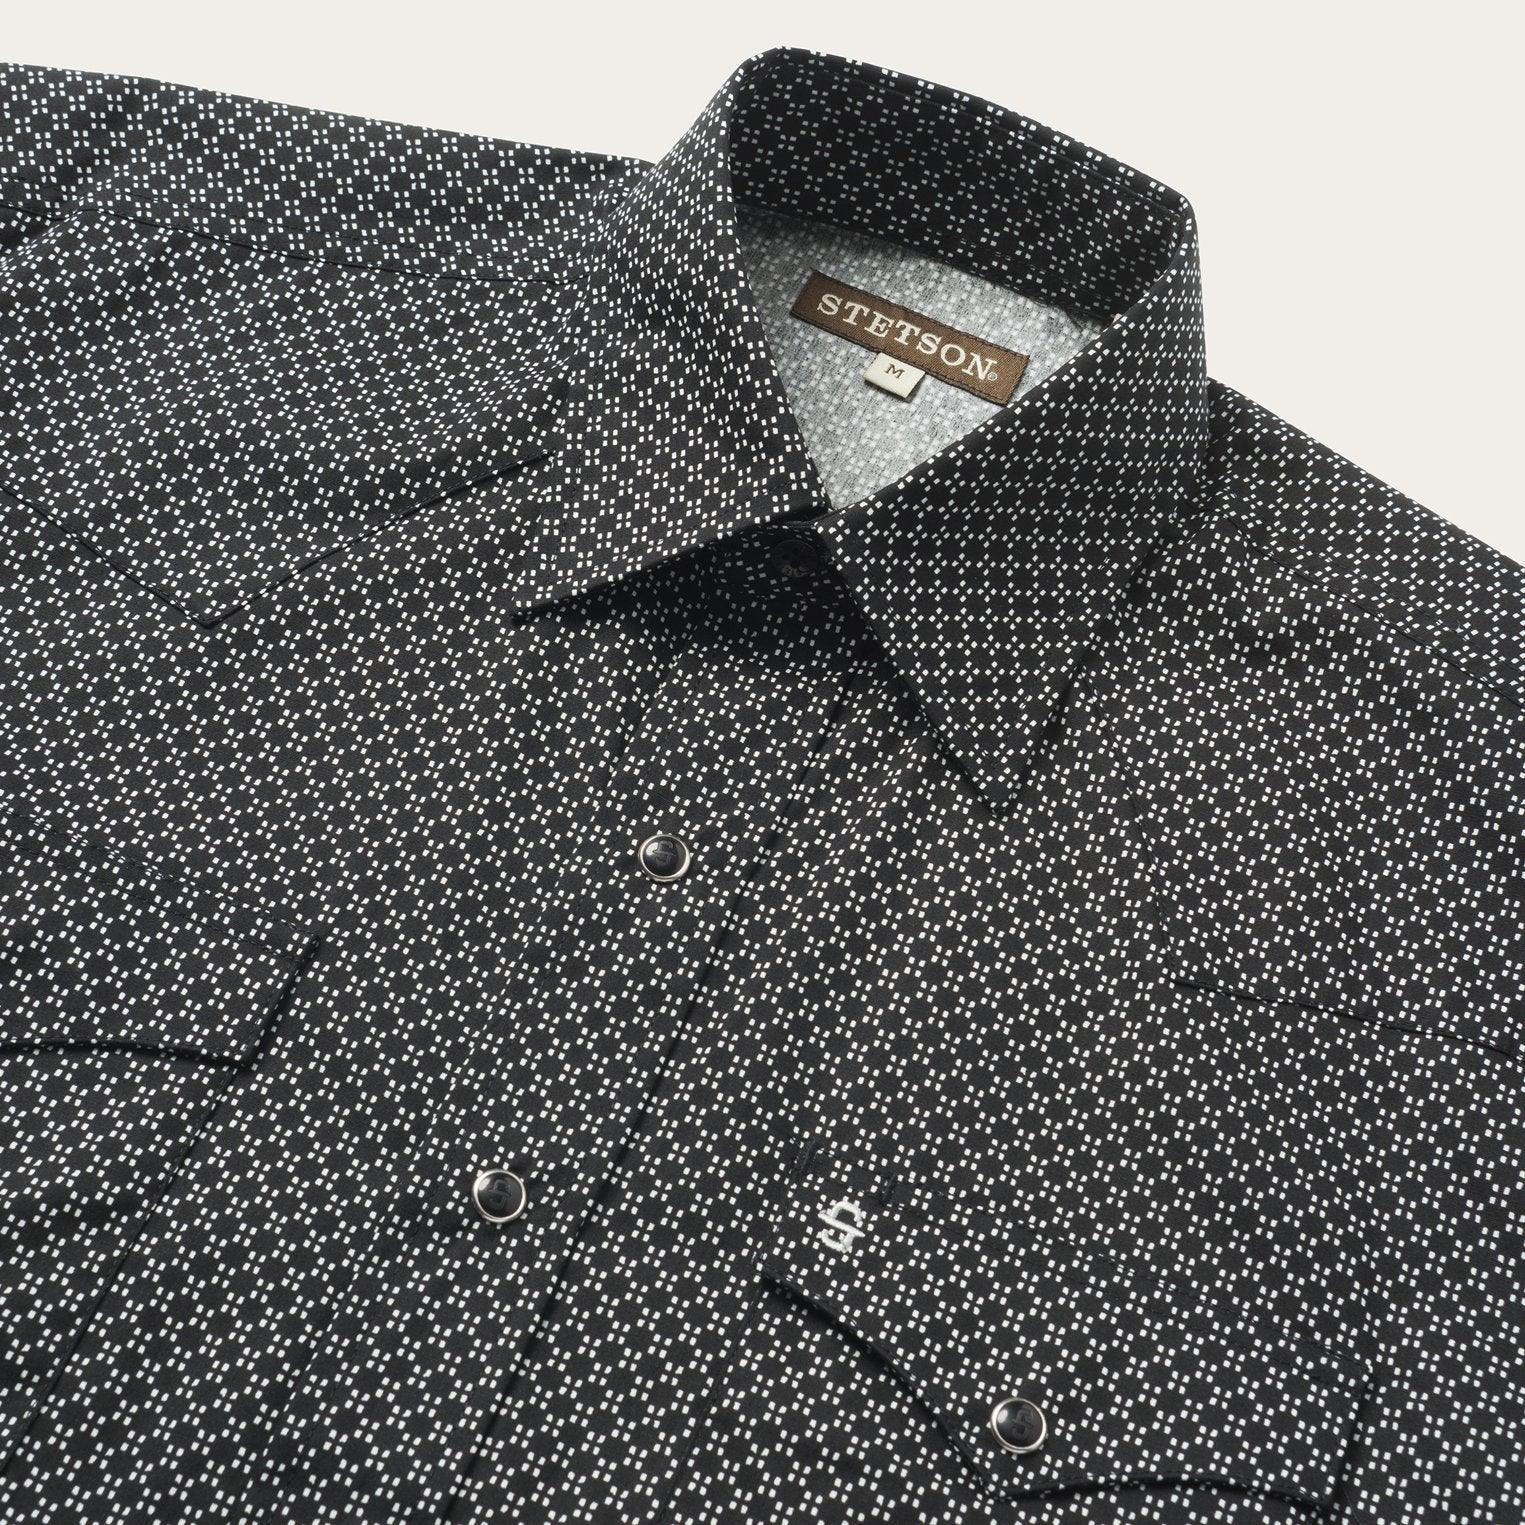 Stetson Classic Snap Front Shirt in Black & White - Flyclothing LLC